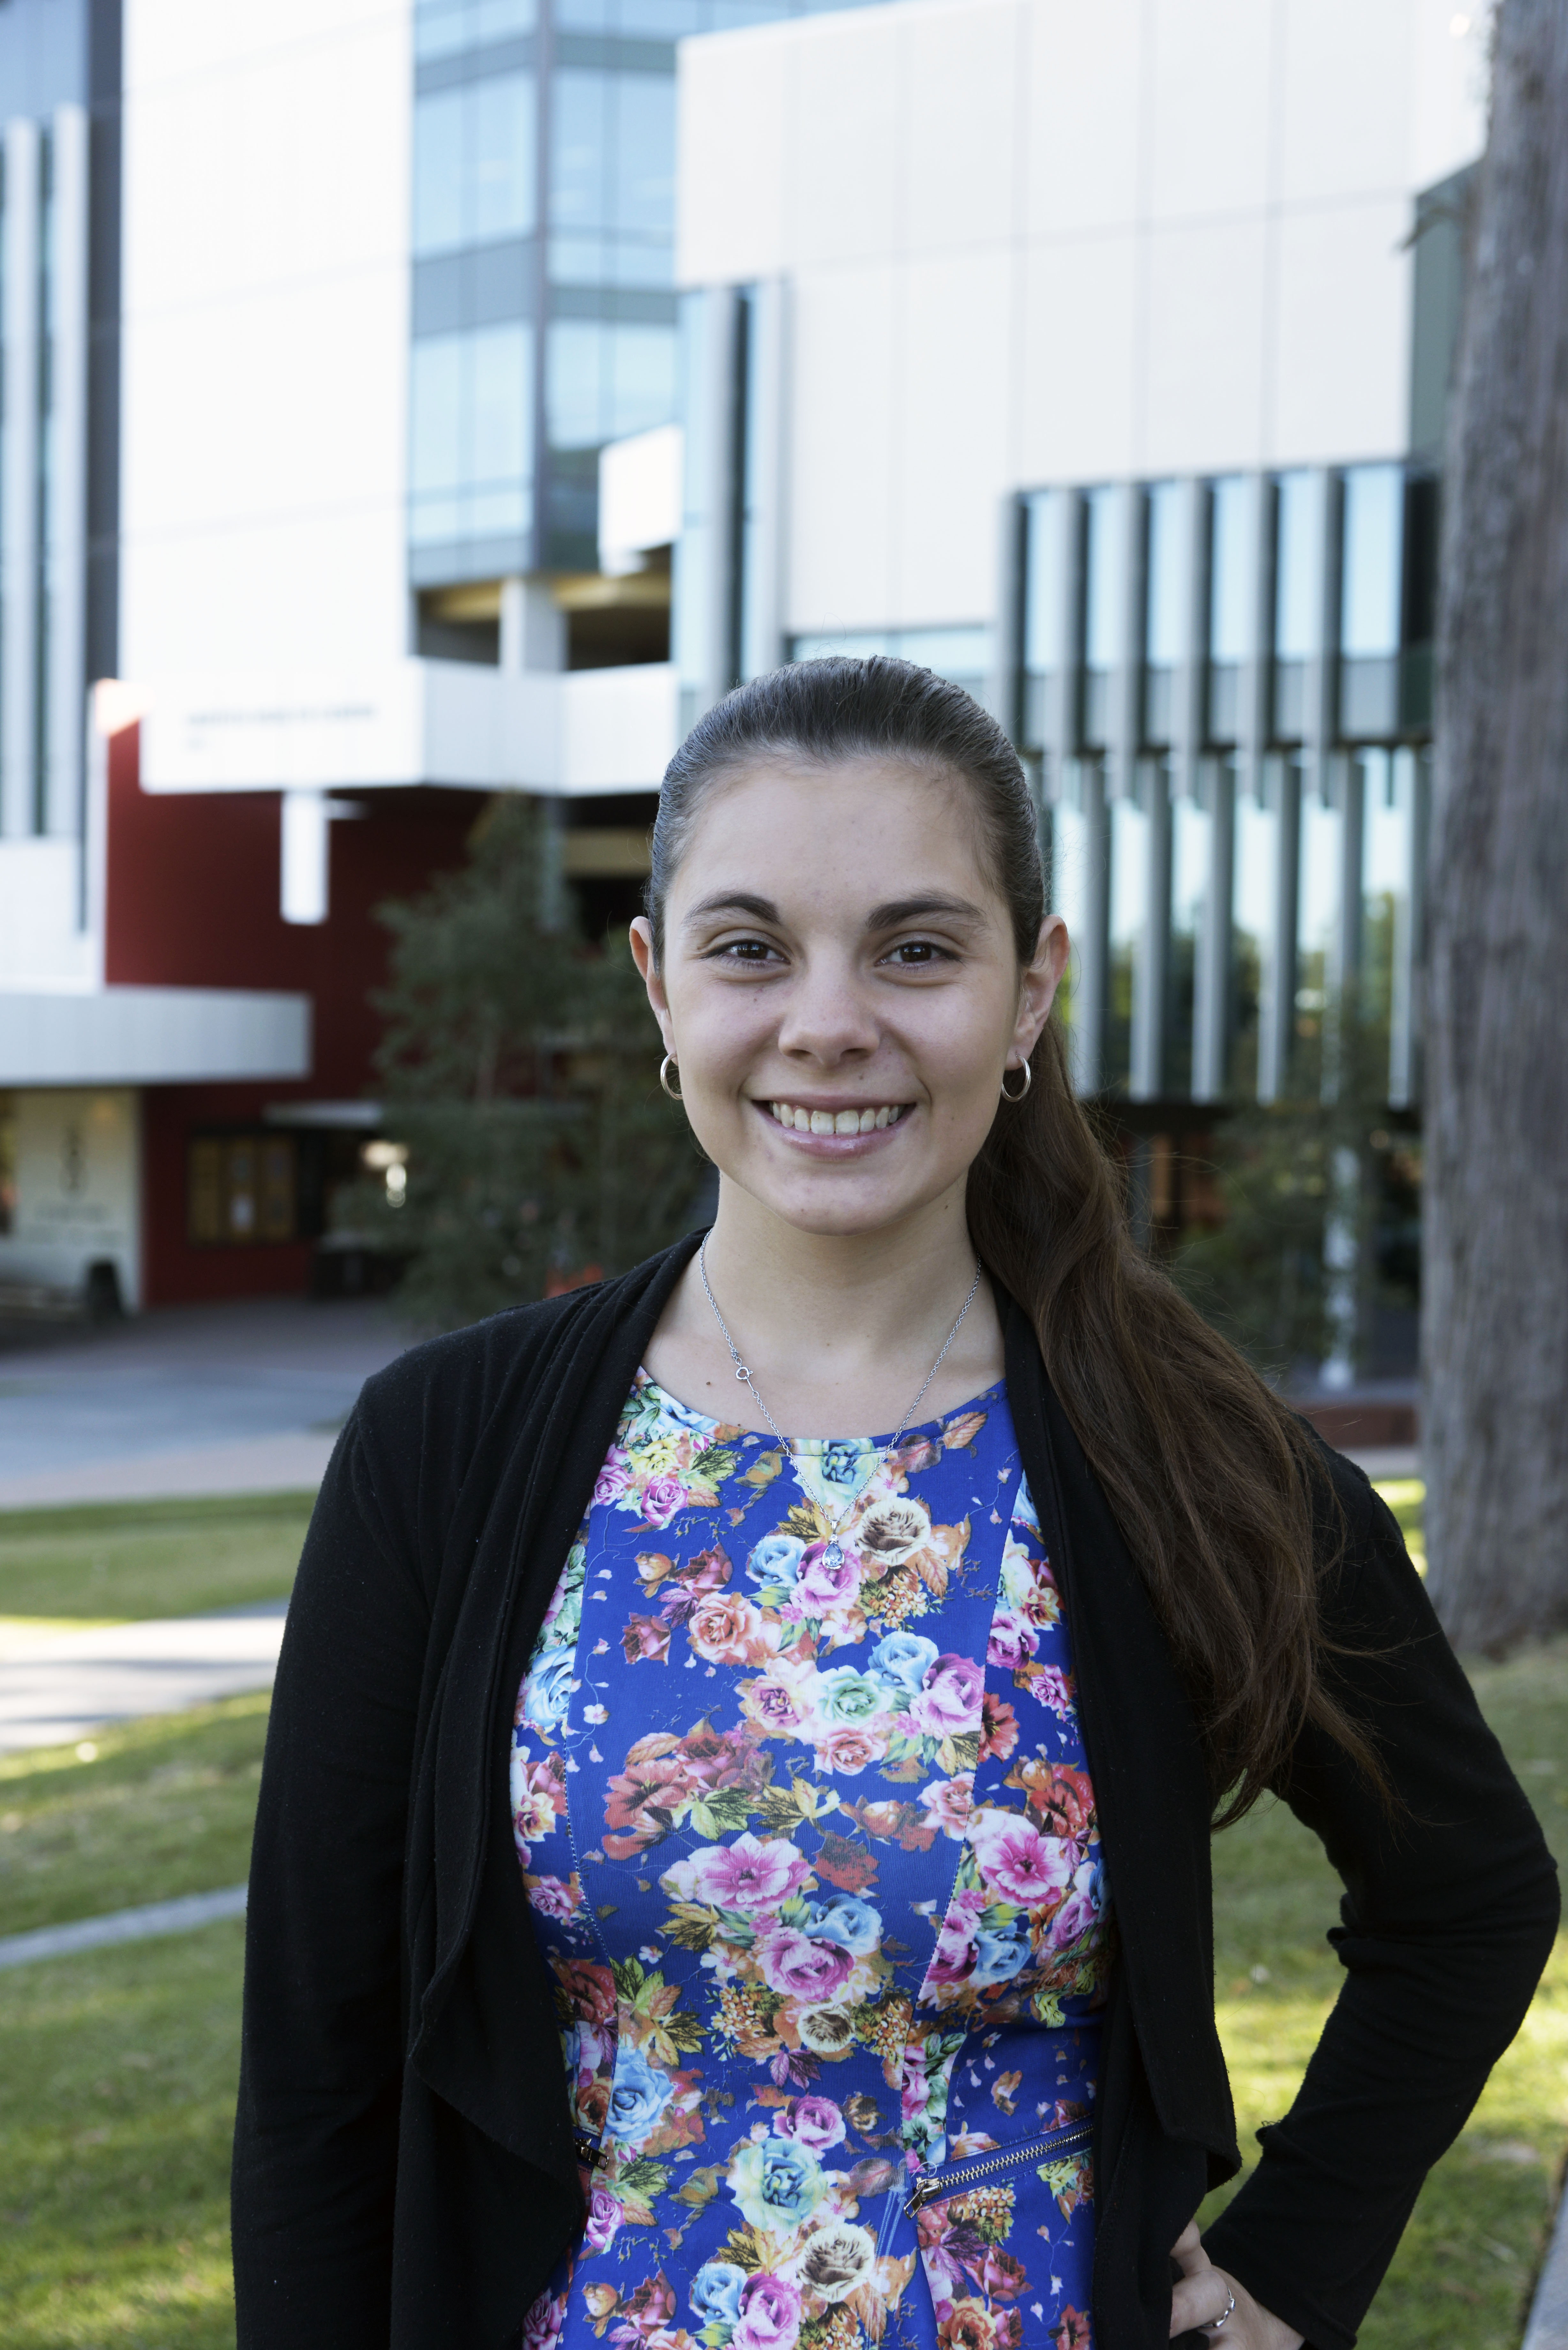 Katelyn Pomroy is part of the Griffith University Enactus team which will promote its key not-for-profit projects at the National Enactus Conference in Melbourne on July 7-9, 2015.